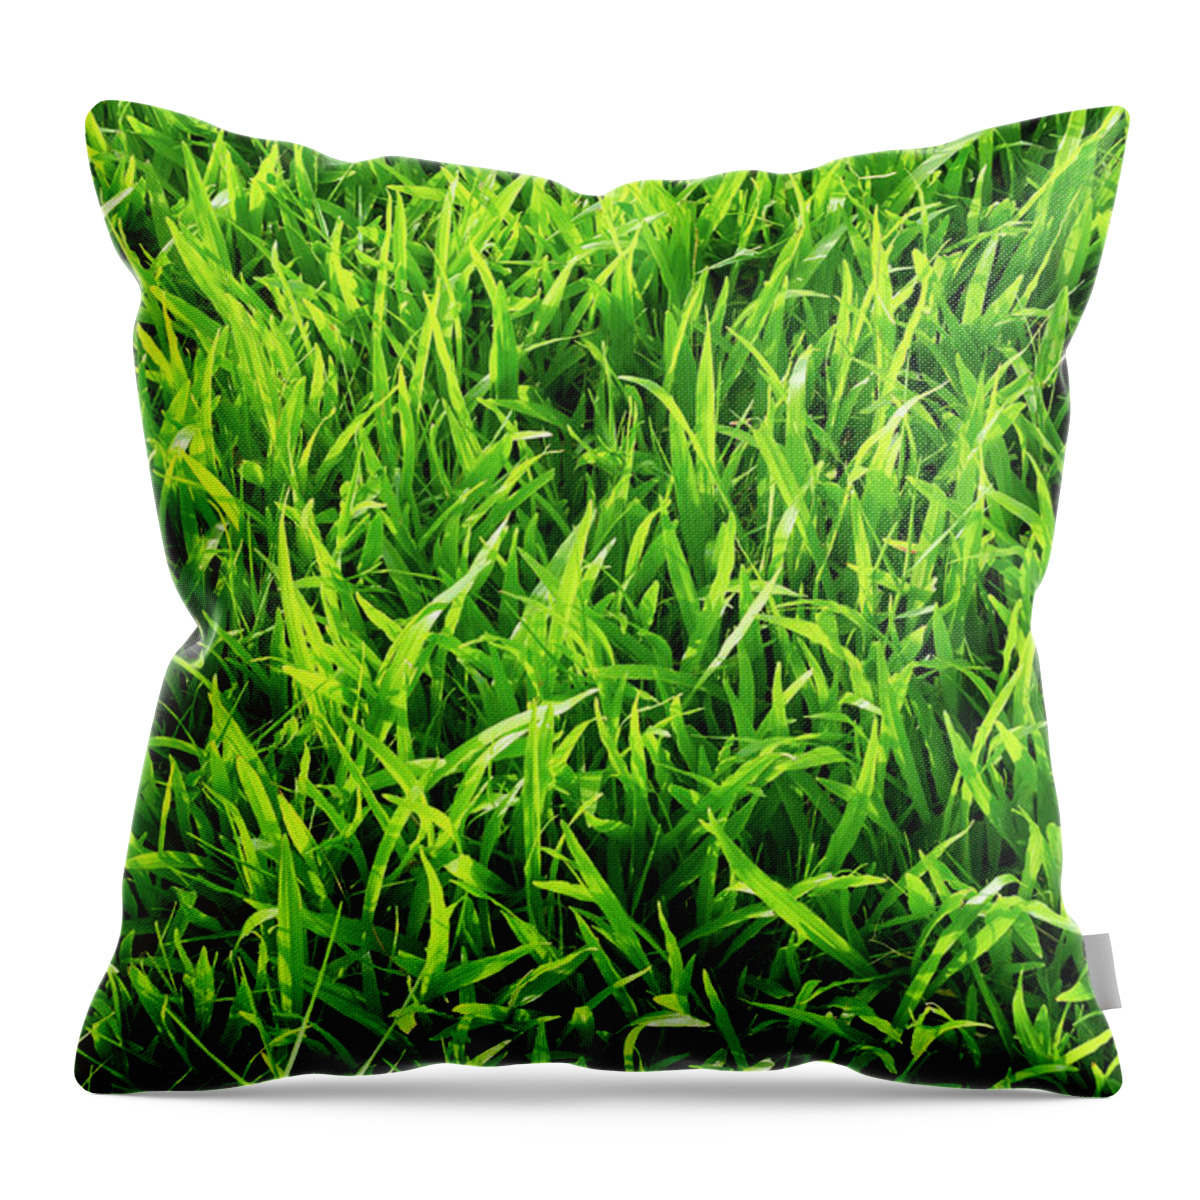 Empty Throw Pillow featuring the photograph Fresh Green Grass by Primeimages